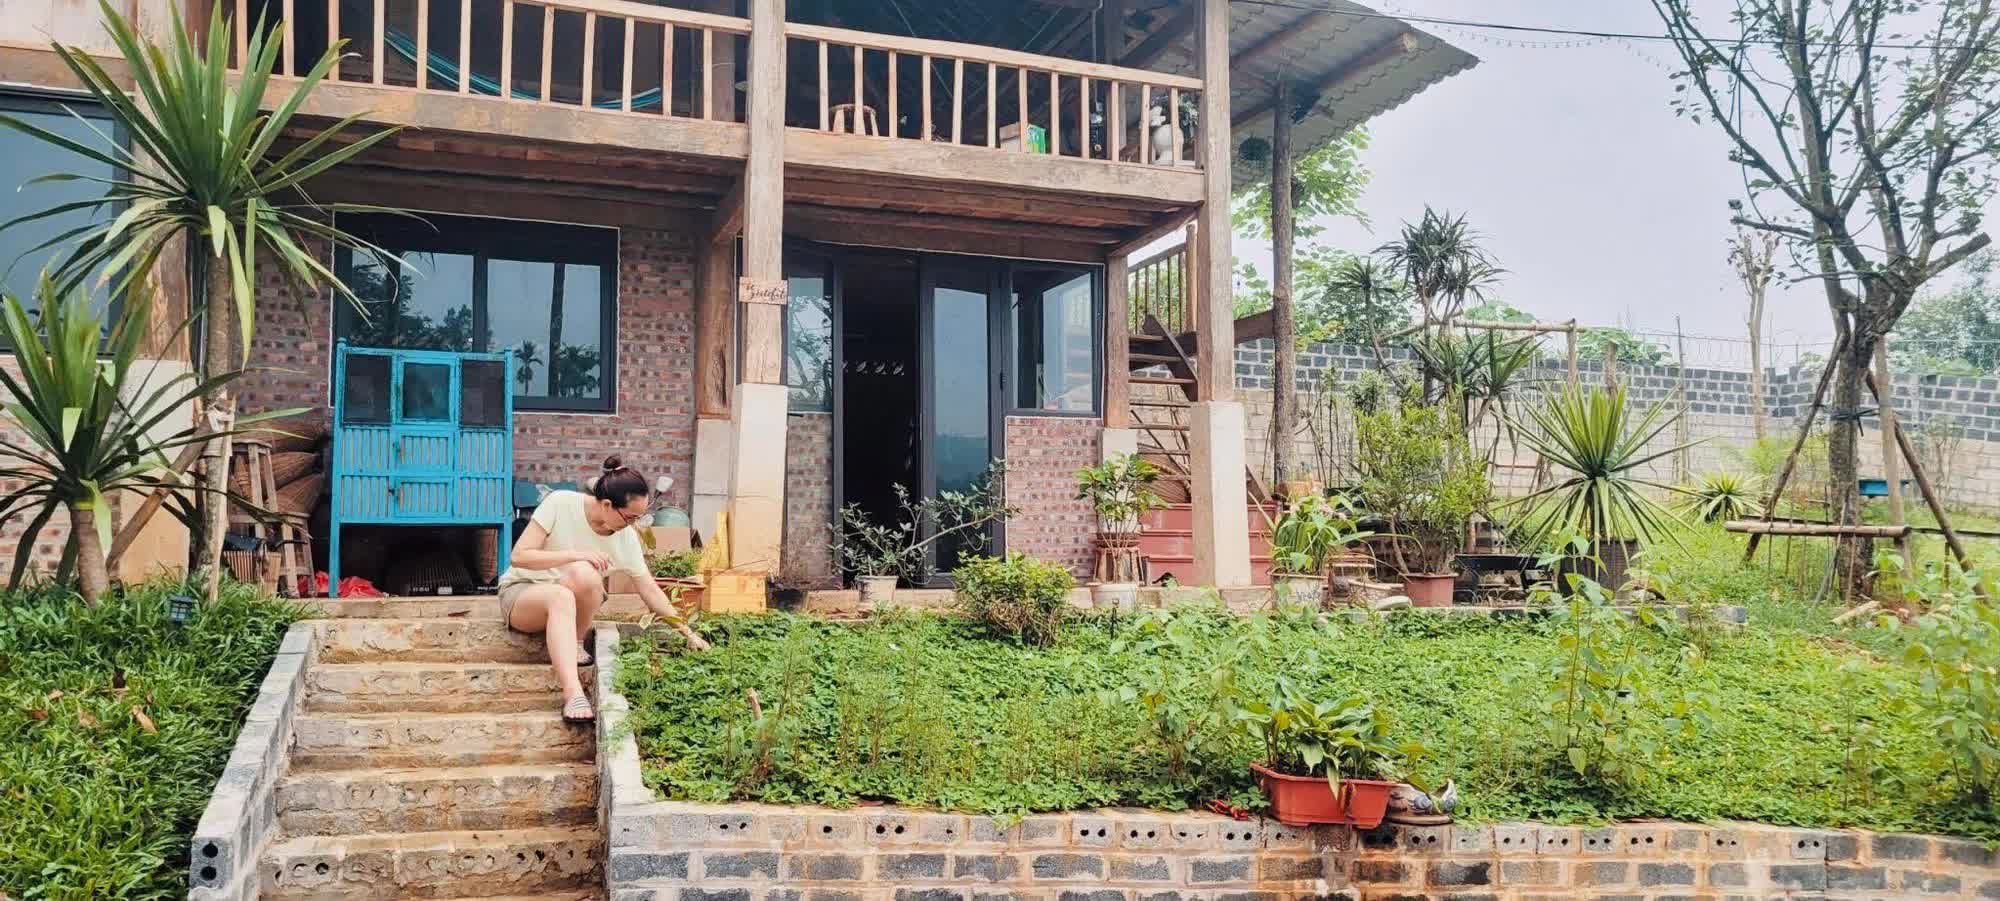 000m2 of suburban land, build house, engineer brother, habitat, the engineer bought 1,000m2 of land on the outskirts of hanoi for his wife to raise chickens, grow vegetables, and build a unique stilt house